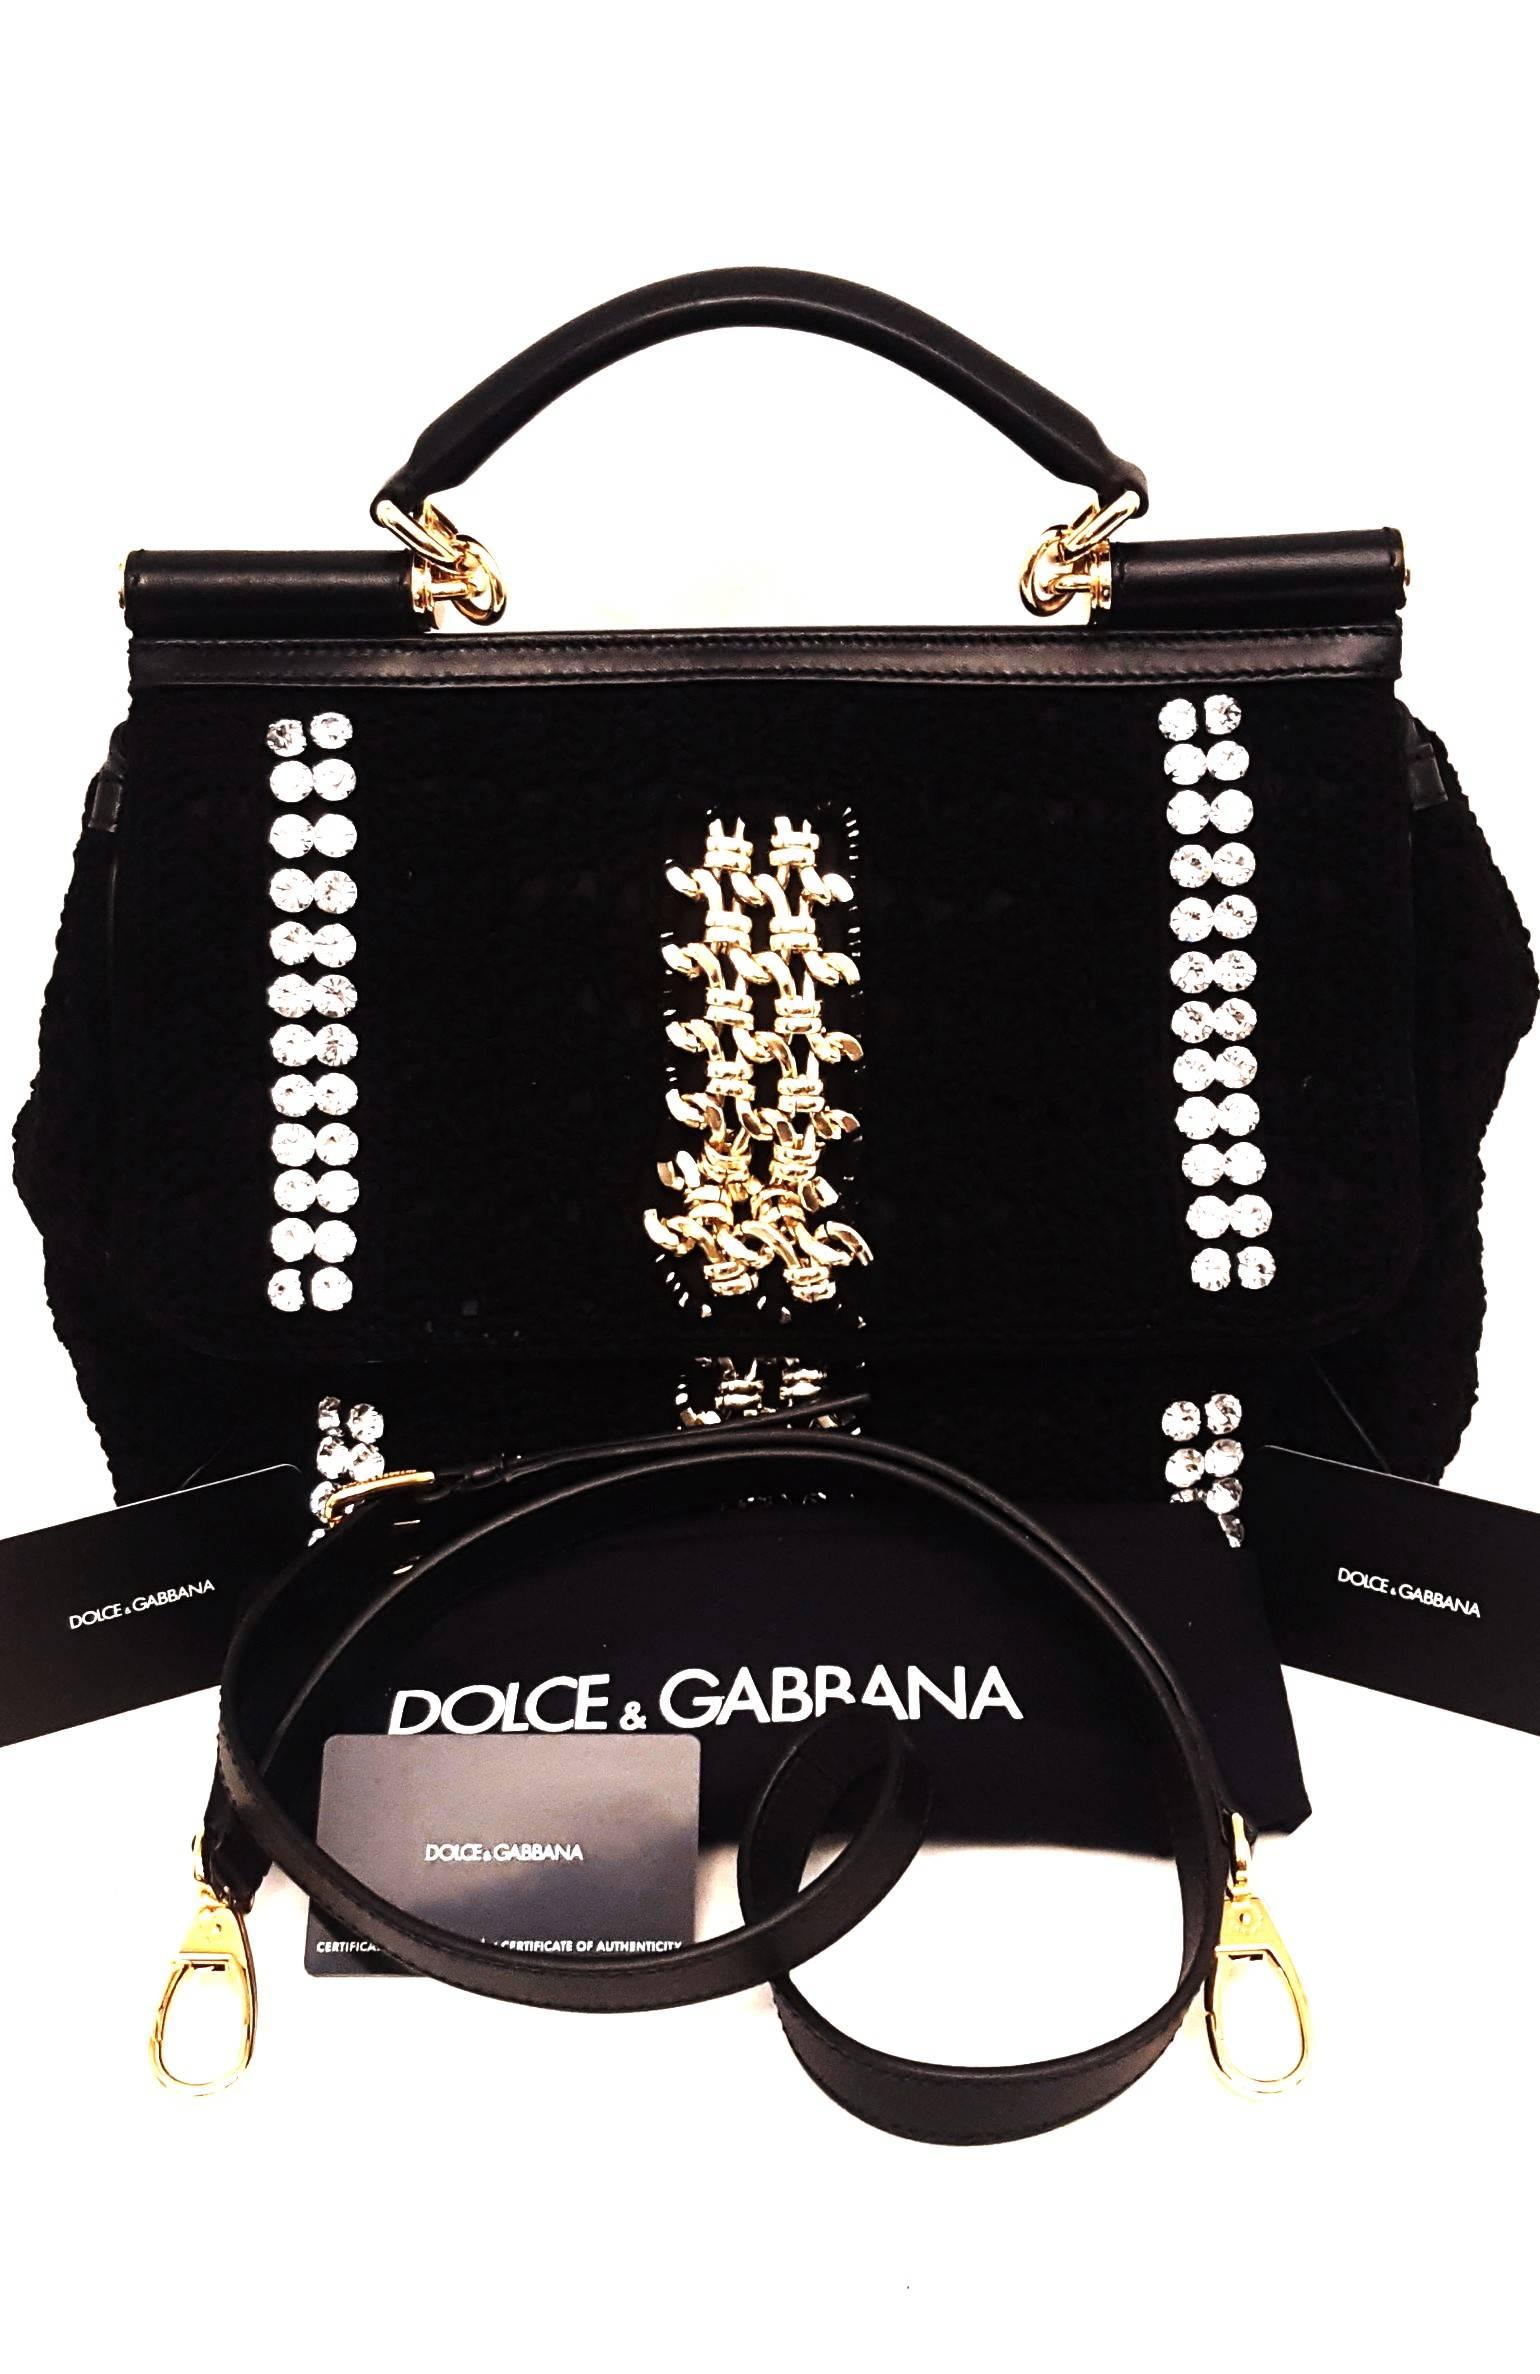 Dolce & Gabbana black crochet Miss Sicily top handle flap with crystal and gold chain band decorations at front and back give this bag the over the top opulence as required by Dominico and Stefano.  This chic satchel is luxuriously crocheted in